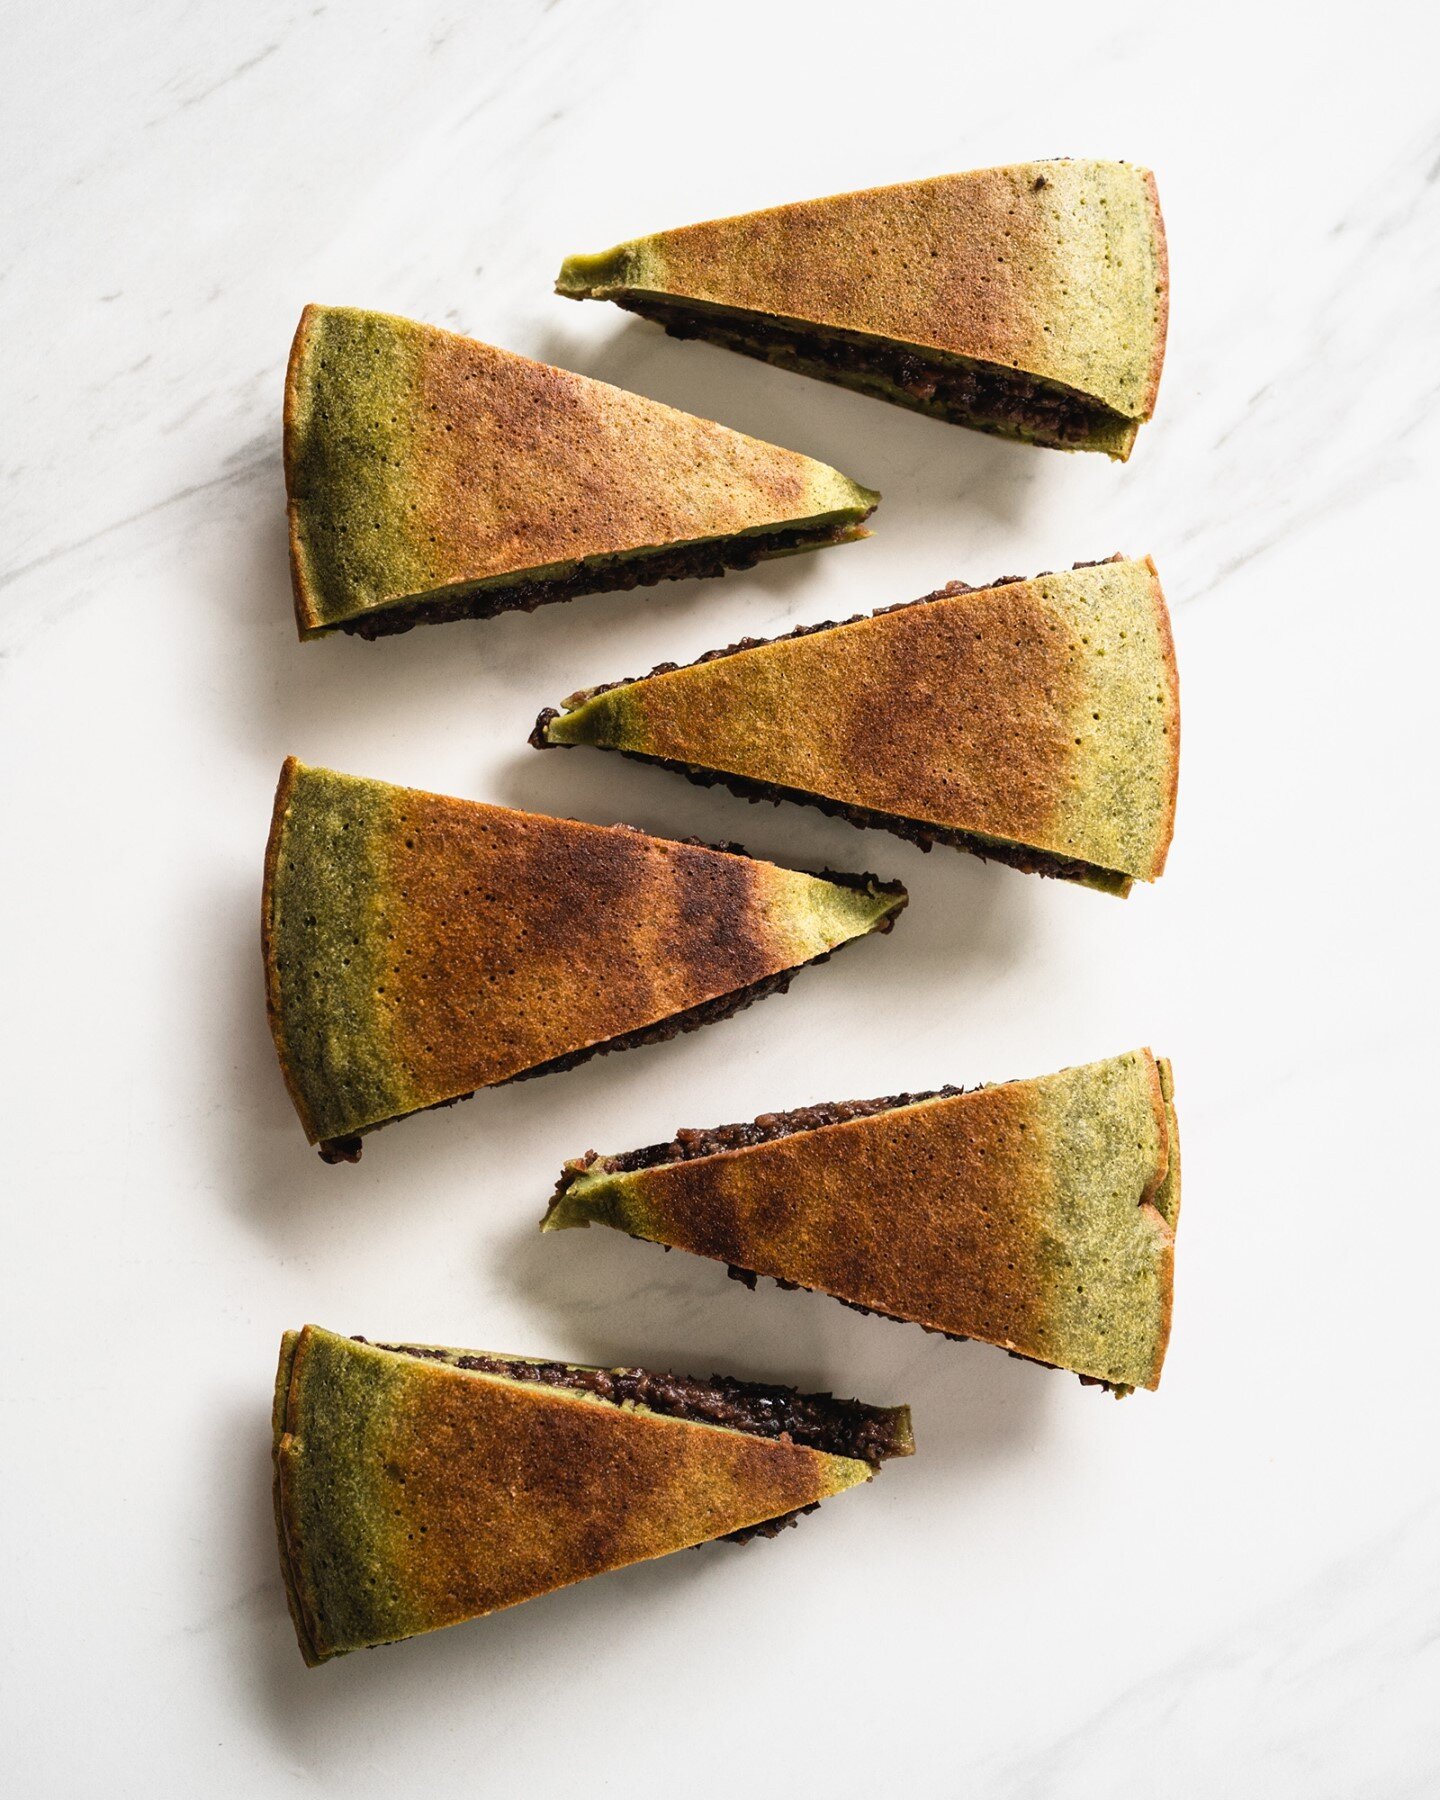 Apam balik, ban chang kuih, min chiang kueh (面煎粿), martabak manis... This Southeast Asian pancake, classically filled with peanuts or creamed corn, has as many names as there are cultures that eat it.
 
But what if I give it a green tea (matcha) ting